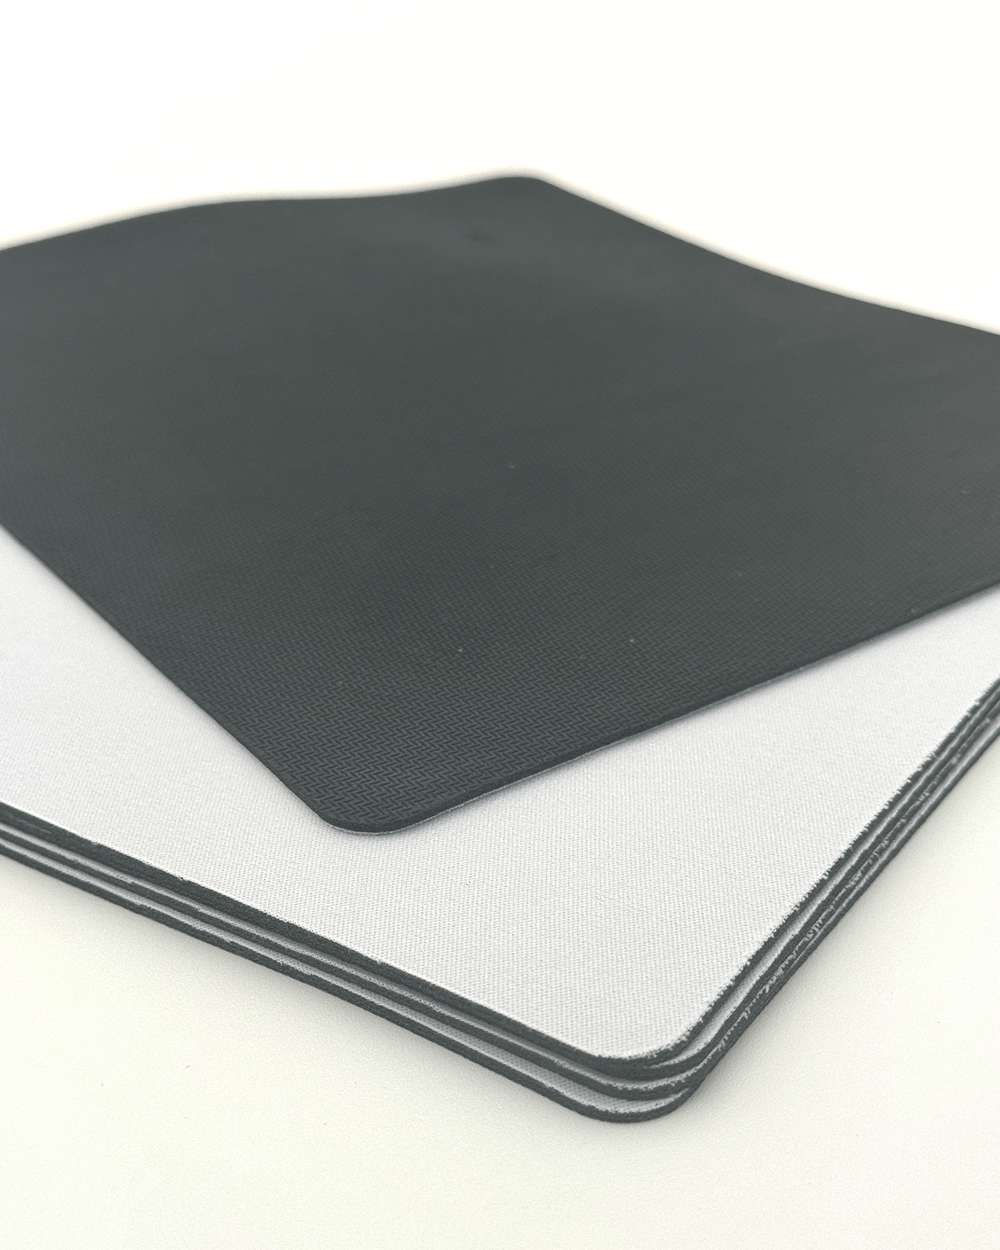 Space Mouse Pad with Nonslip Base (SIZE 8"x9")